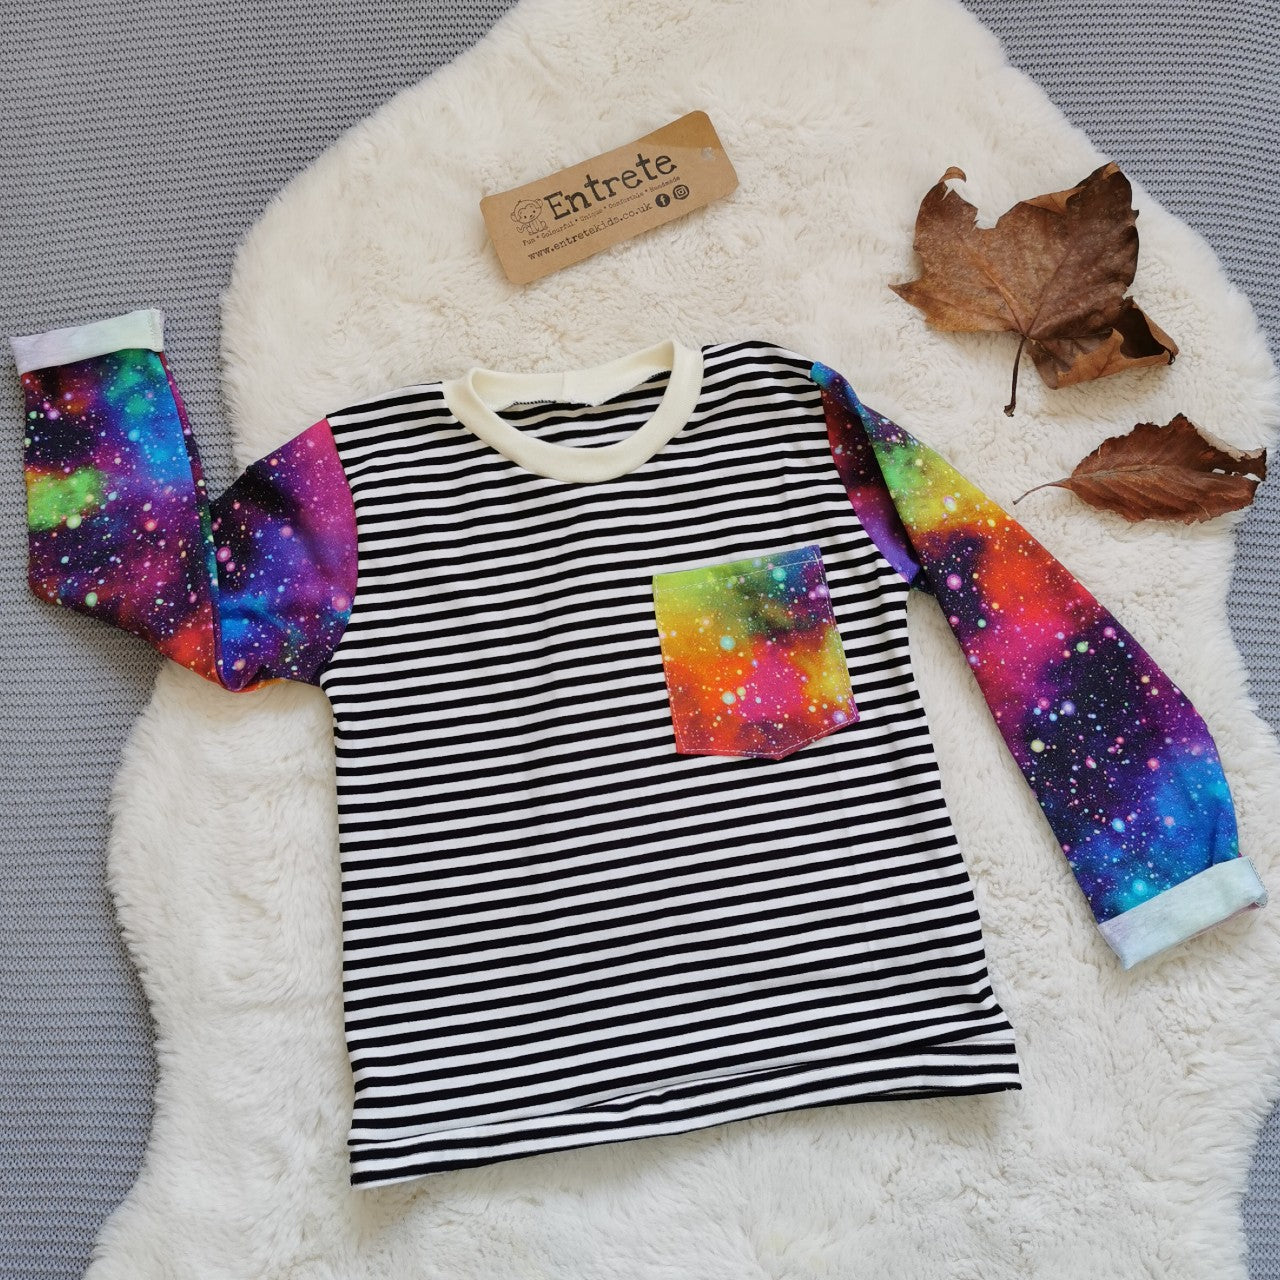 Long Sleeve T-Shirt - Monochrome Striped & Speckled Galaxy